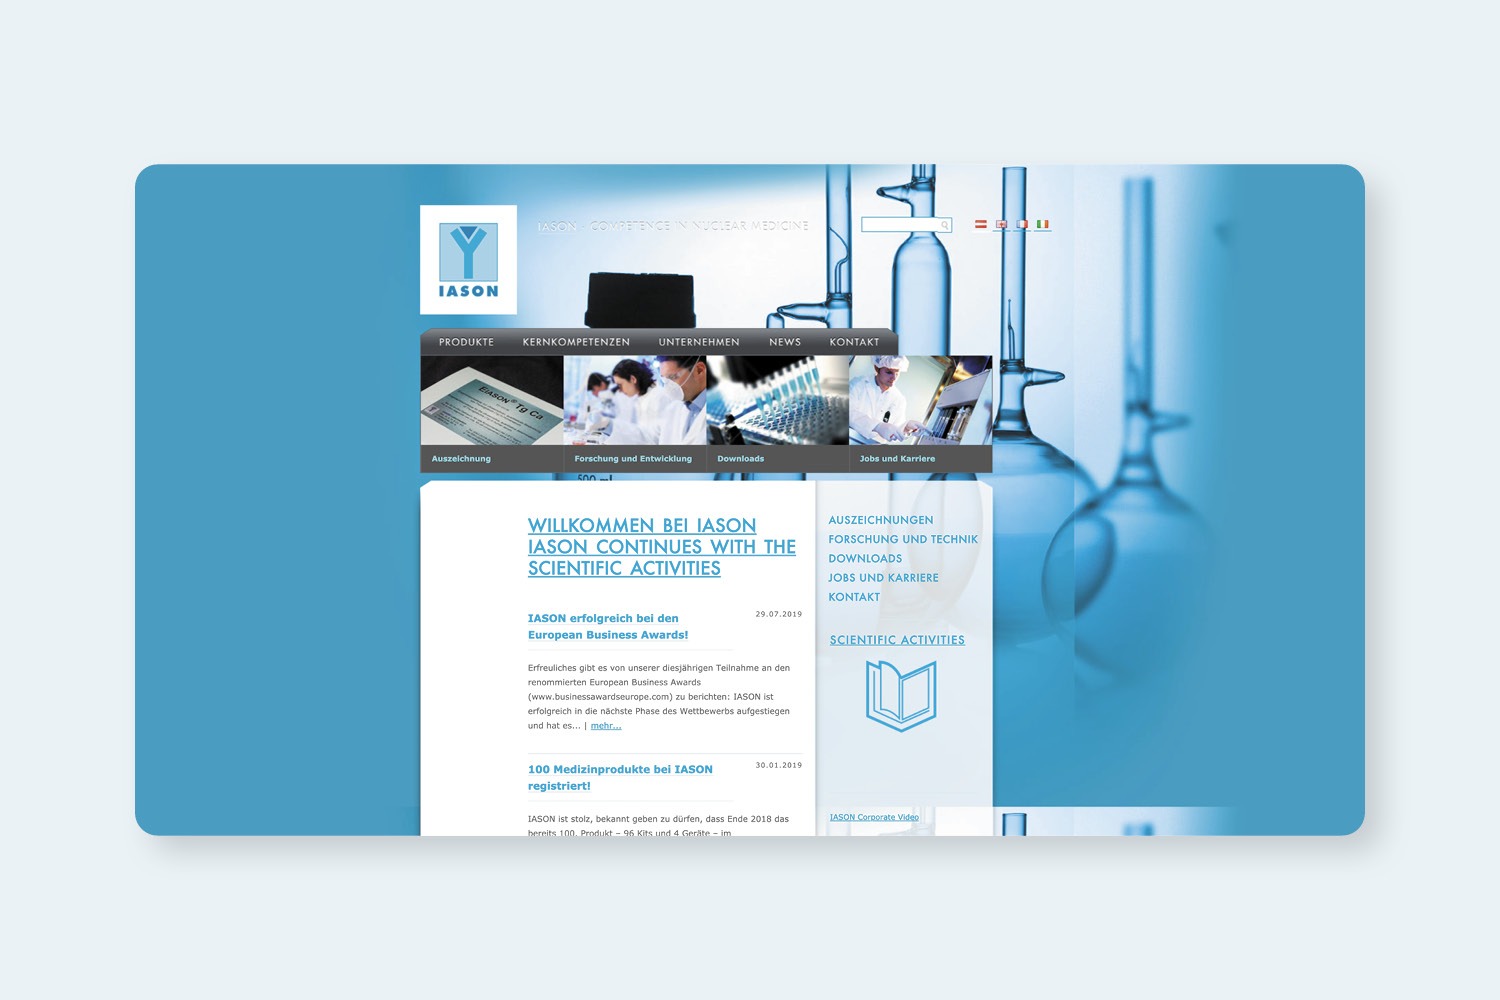 A website design featuring a blue background and an image of a lab.